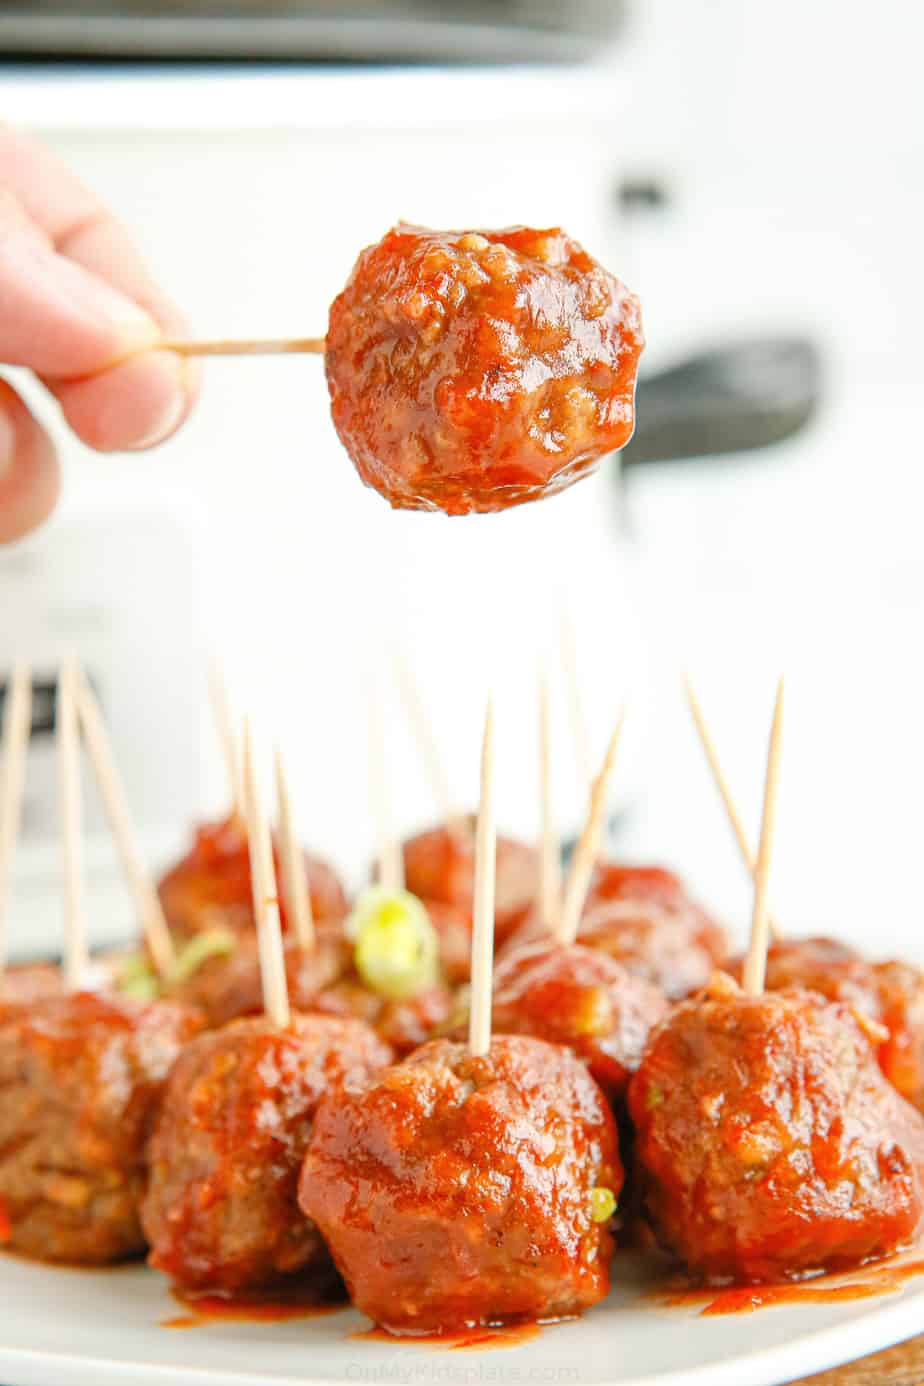 Meatballs in sauce on a plate with a toothpick in each meatball. One meatball on a toothpick is being taken from the platter.